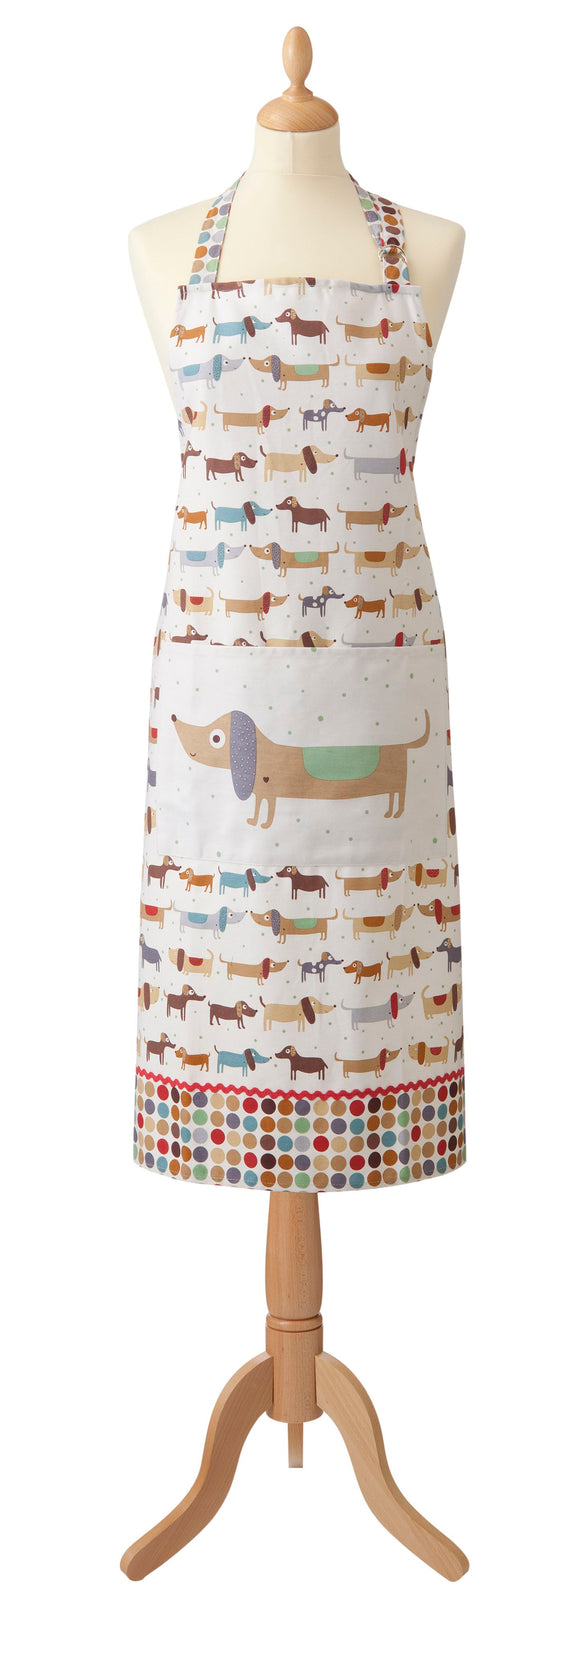 Cotton Apron Hot Dog by Ulster Weavers - Gifteasy Online